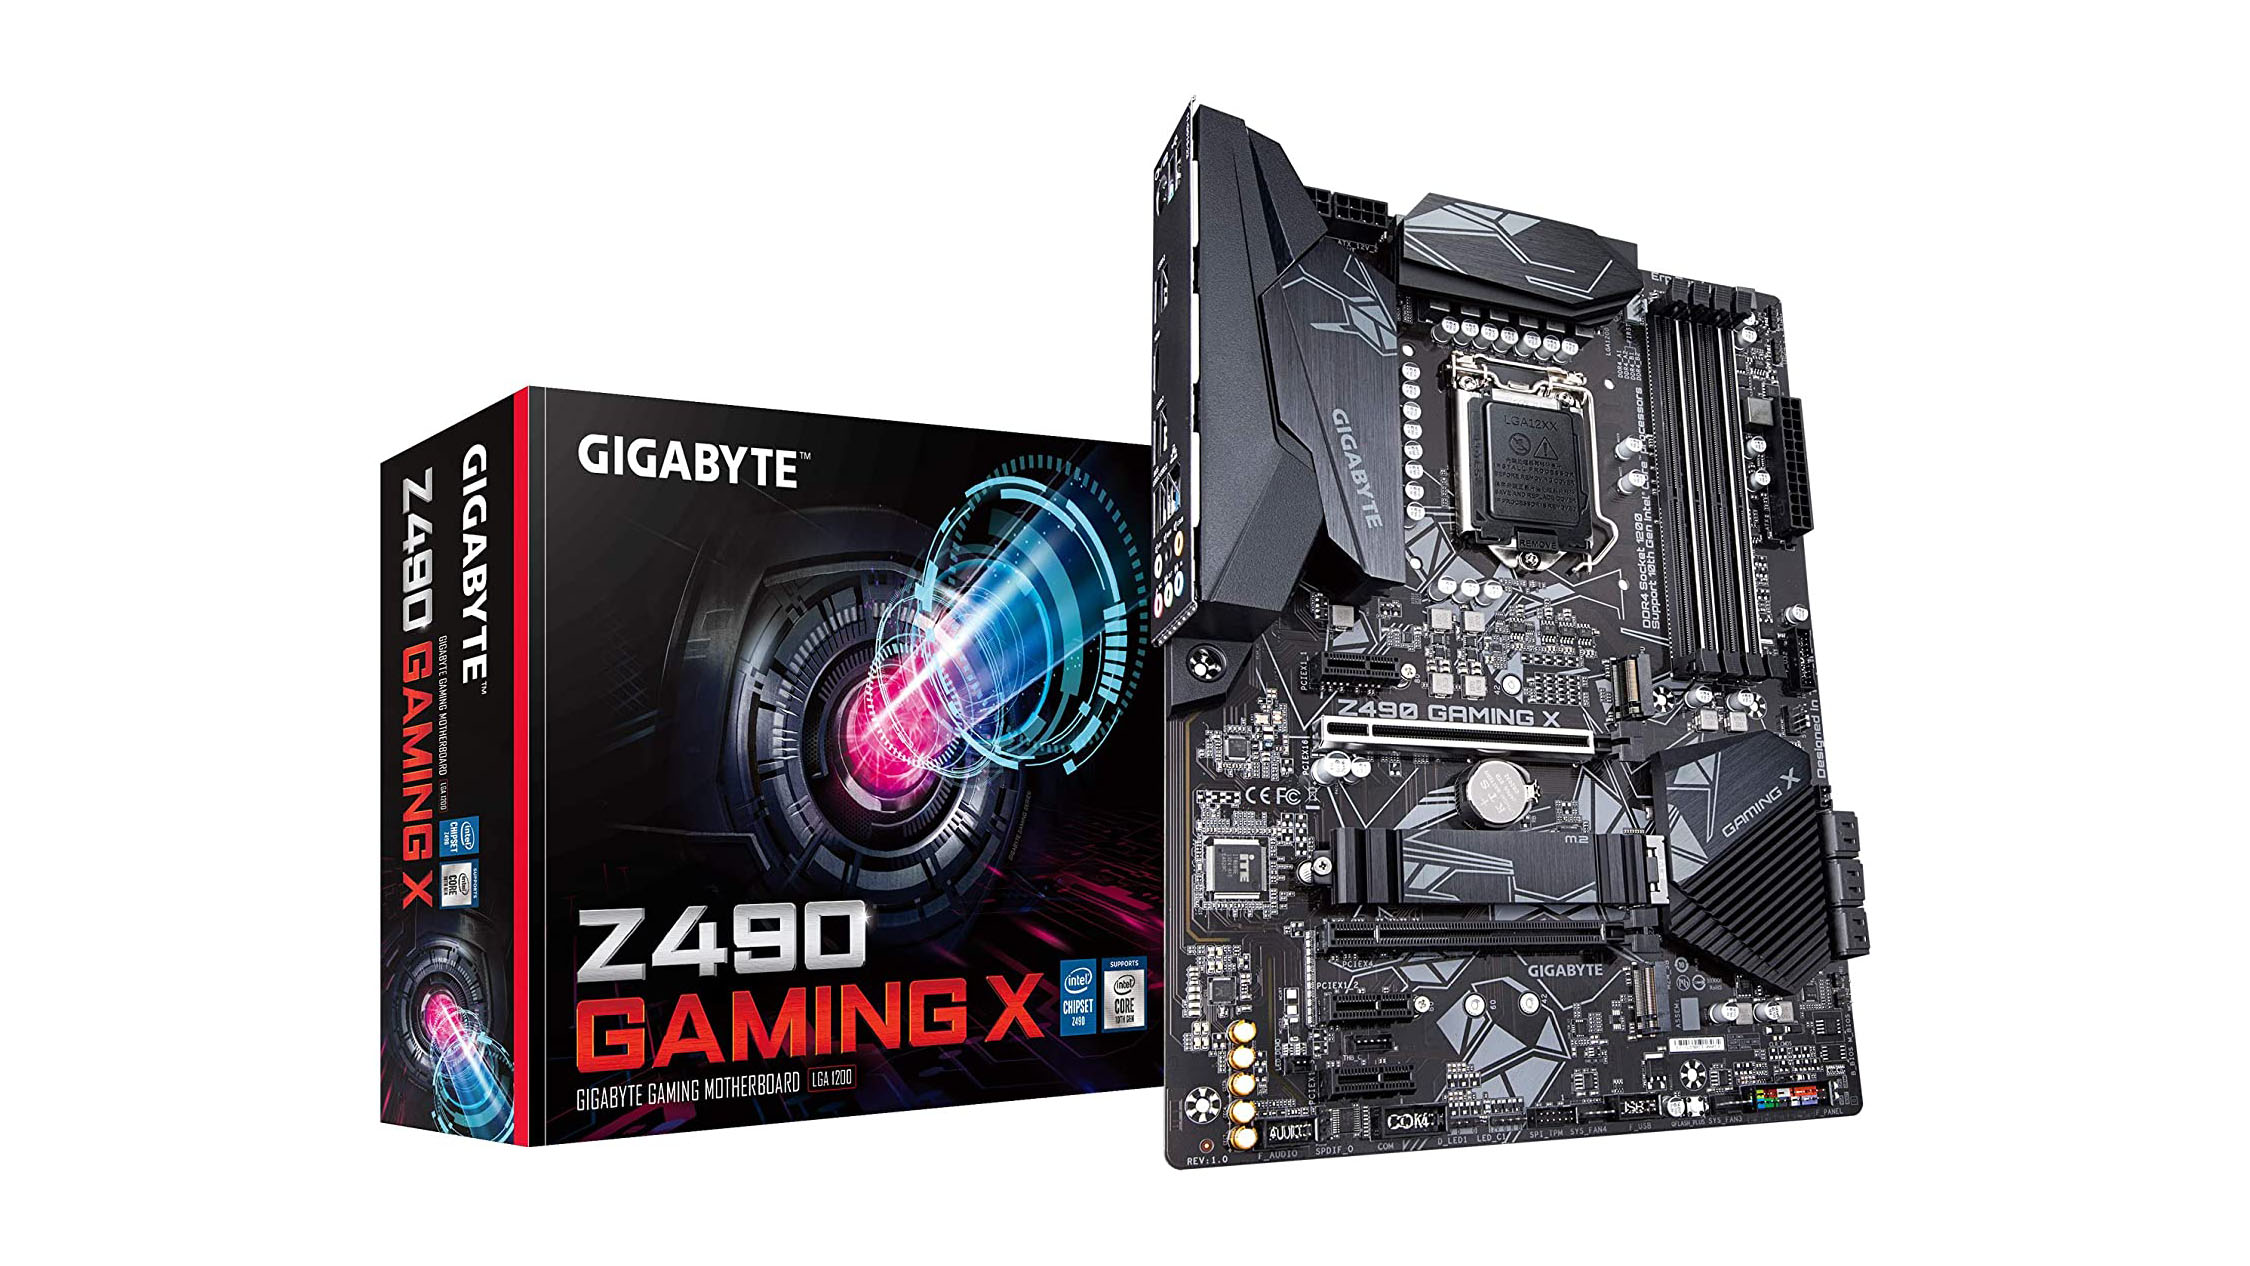 The GIGABYTE Z490 Gaming X is a great choice for an Intel fan who needs a new motherboard in the budget sphere.